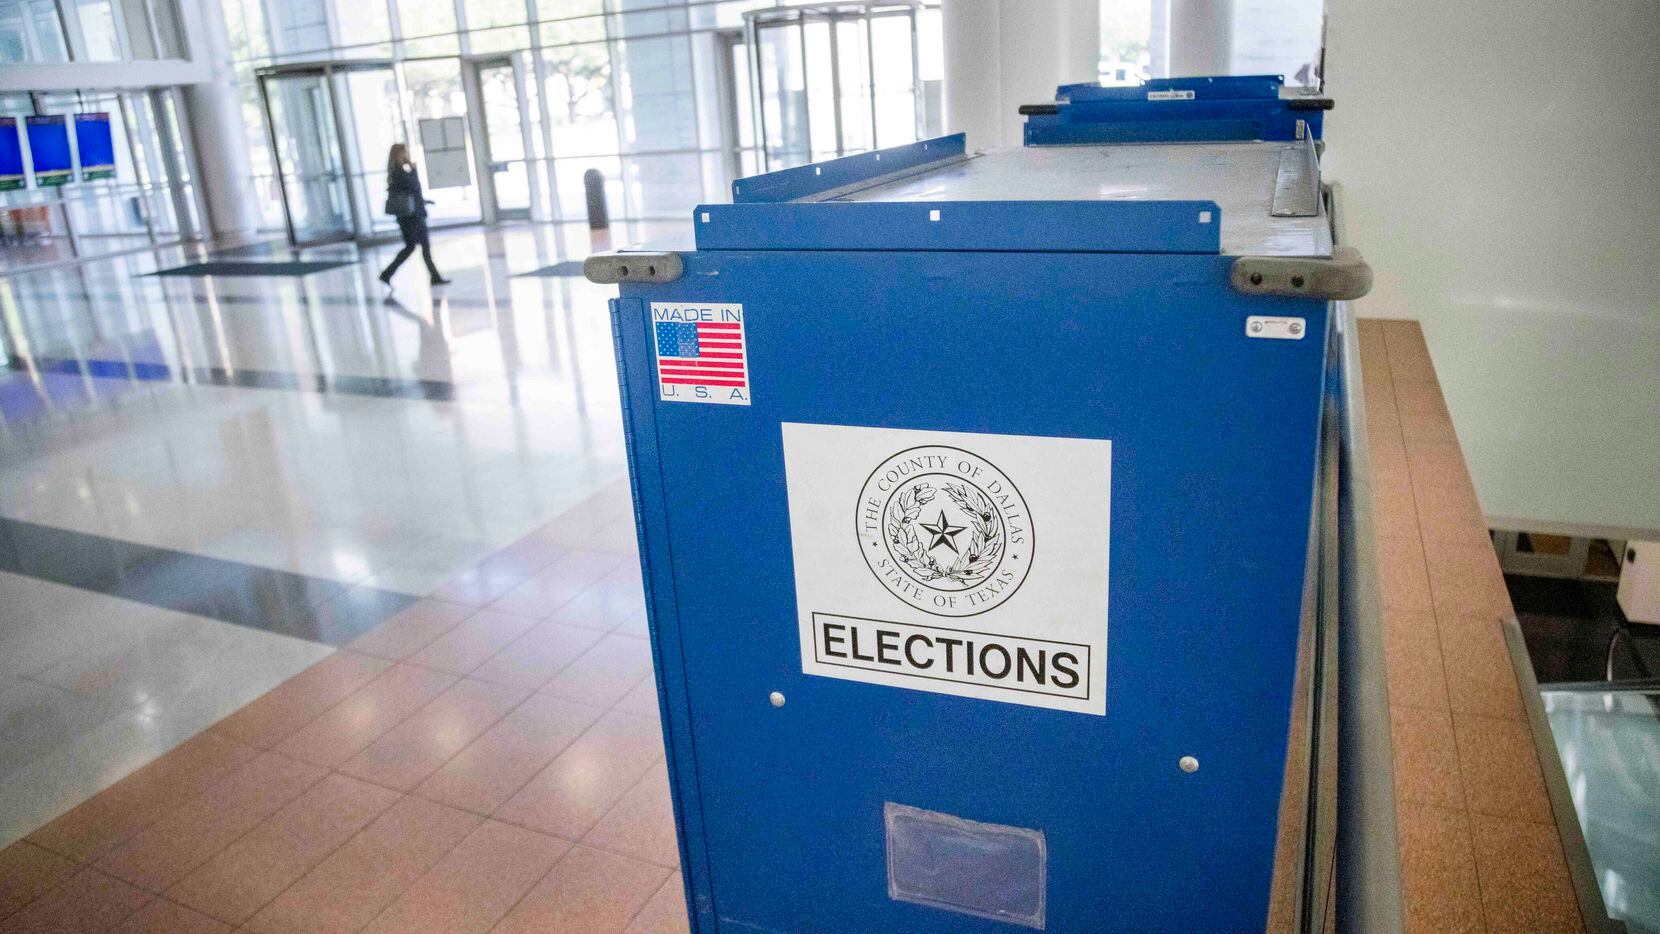 Equipment belonging to Dallas County Elections sat in the lobby of the George Allen Courts...